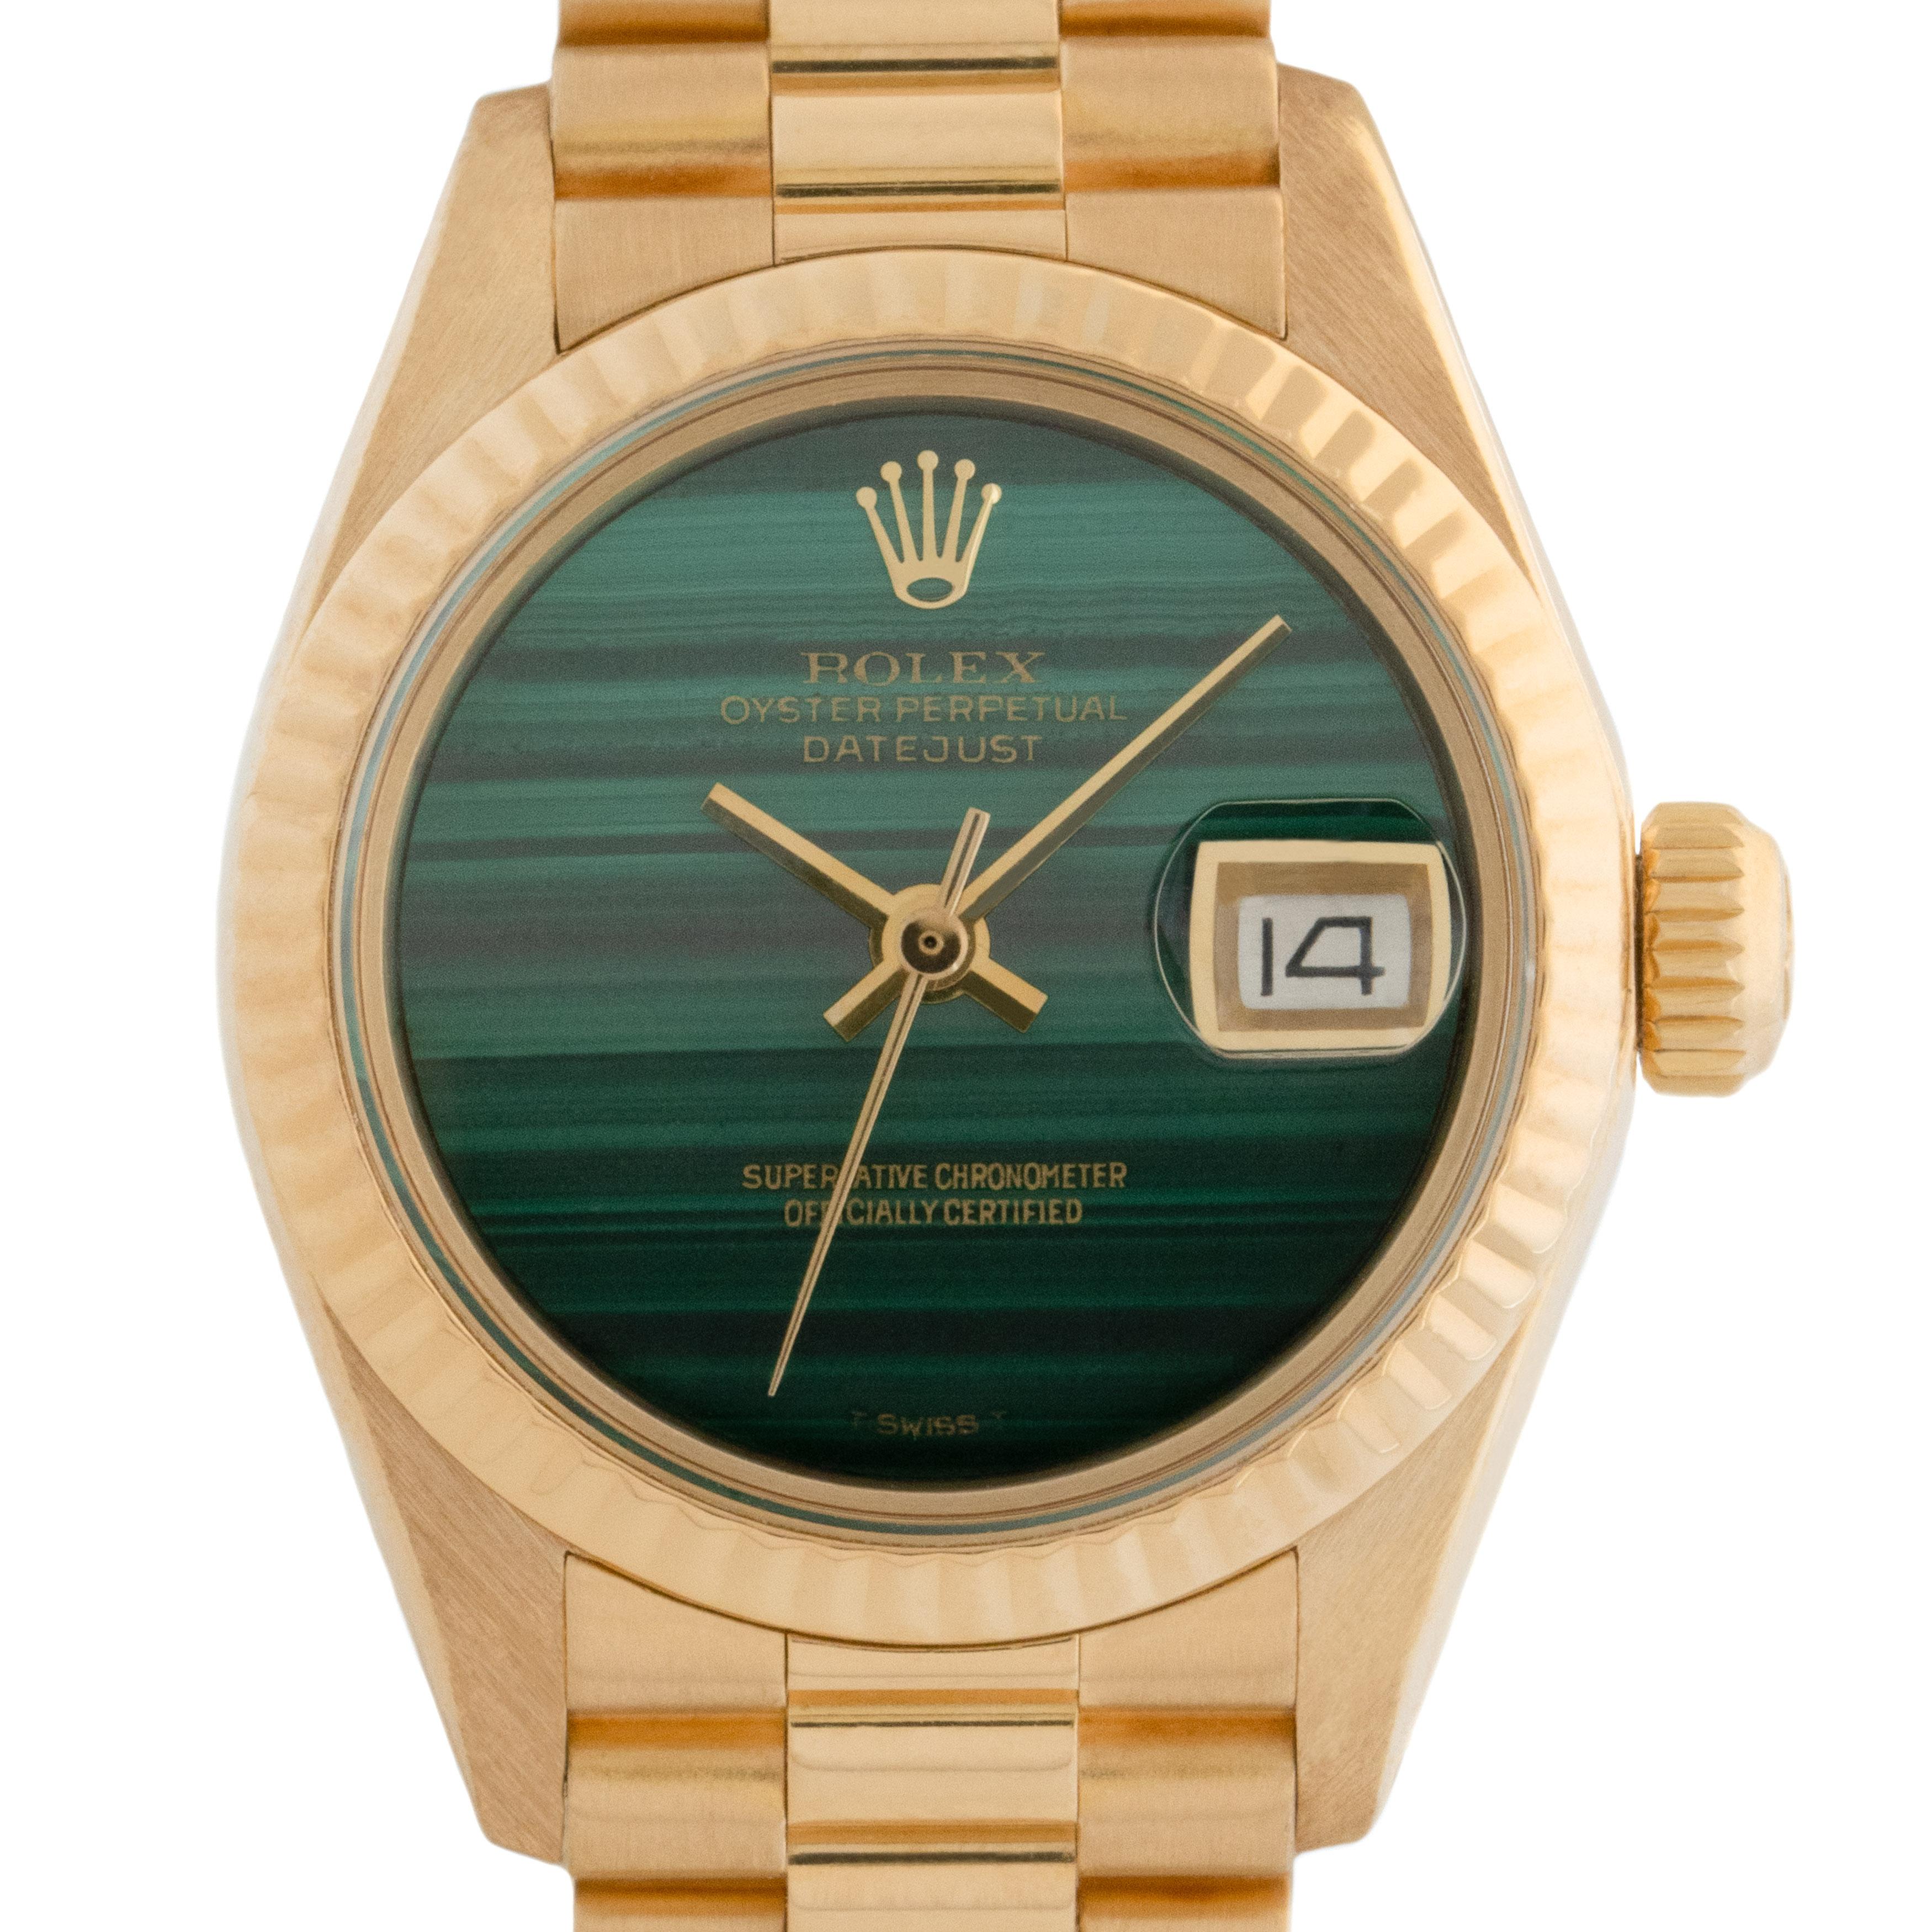 Vintage Rolex 18 Karat Yellow Gold Ladies DateJust with a RARE and original Rolex Malachite dial 
circa 1978
26mm Dial
Automatic movement
Model Ref 6917

Currently fits up to a 6.5